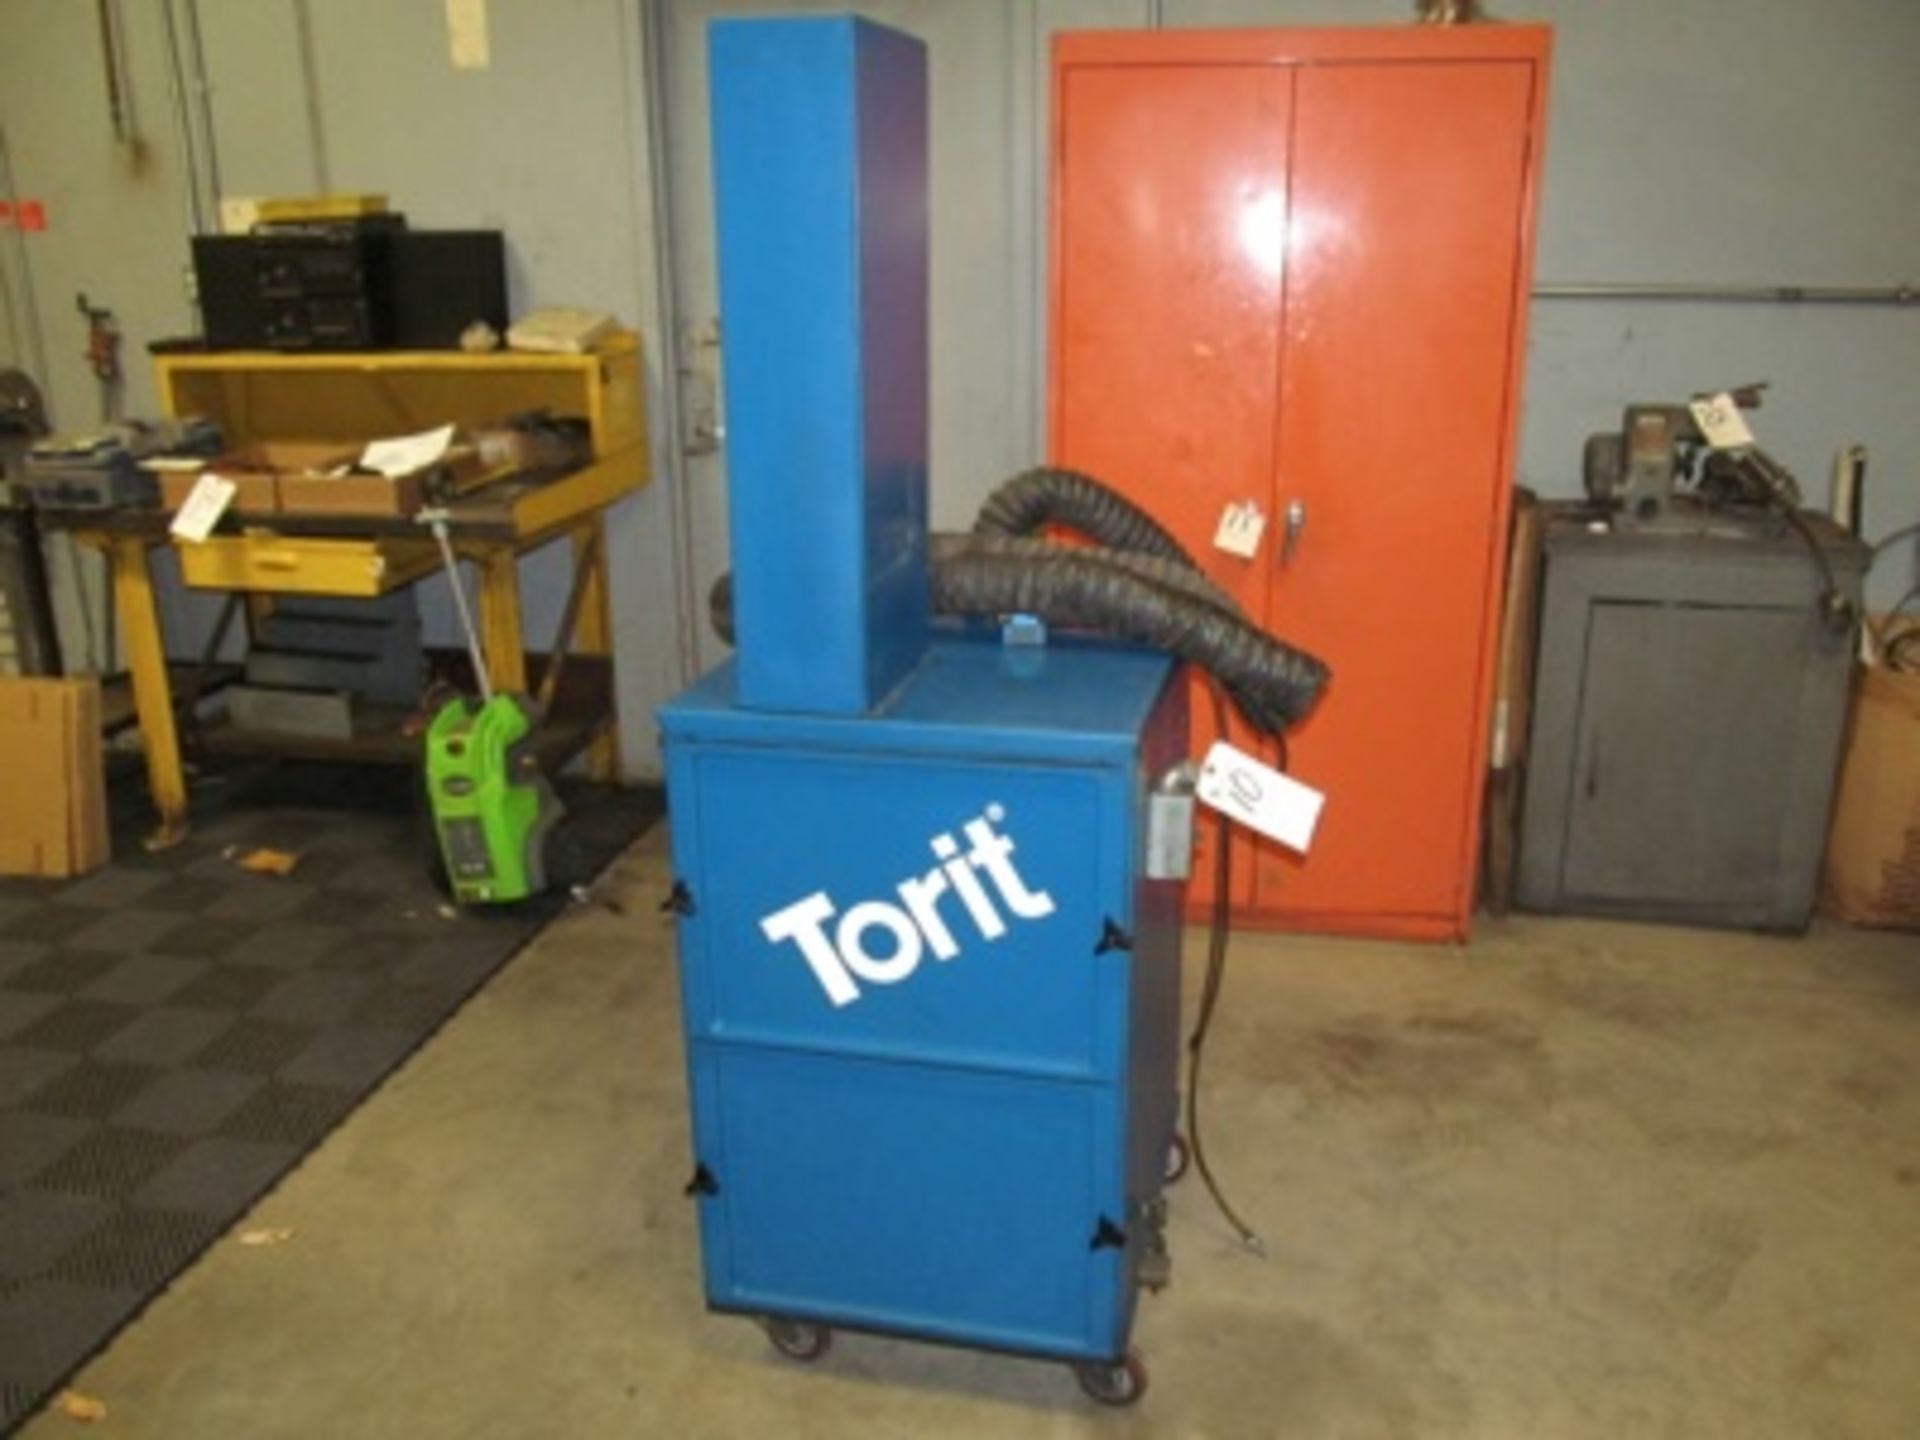 Donaldson Torit mod. 50 Cab. Portable Dust Collection System, 3/4hp, 60 Cycle, 3600 RPM